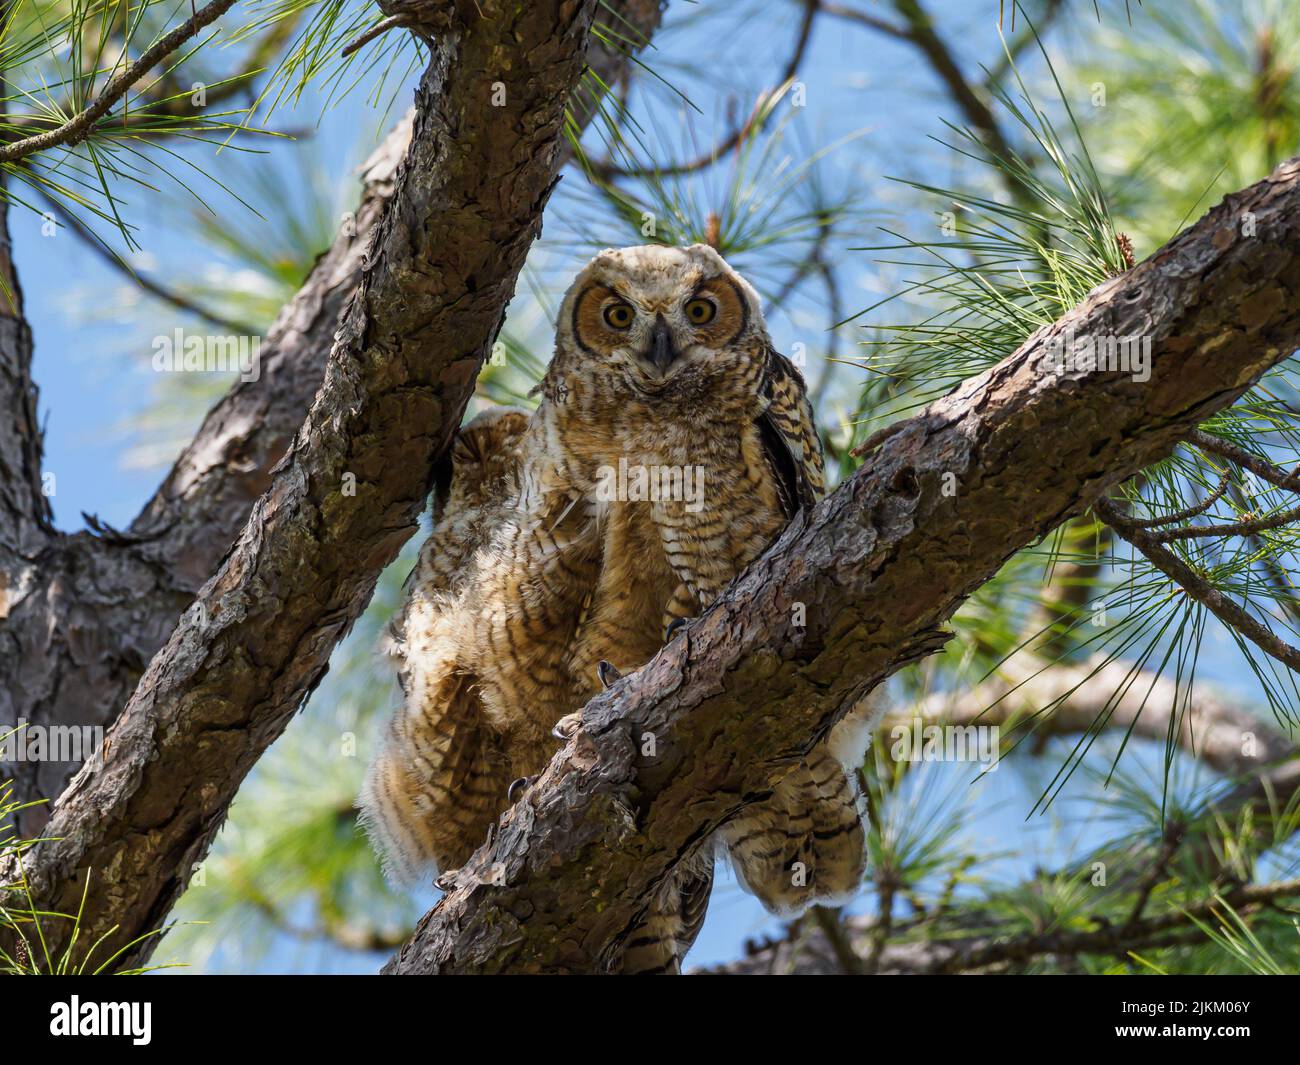 An owl with beautiful plumage on a pine branch, looking down Stock Photo